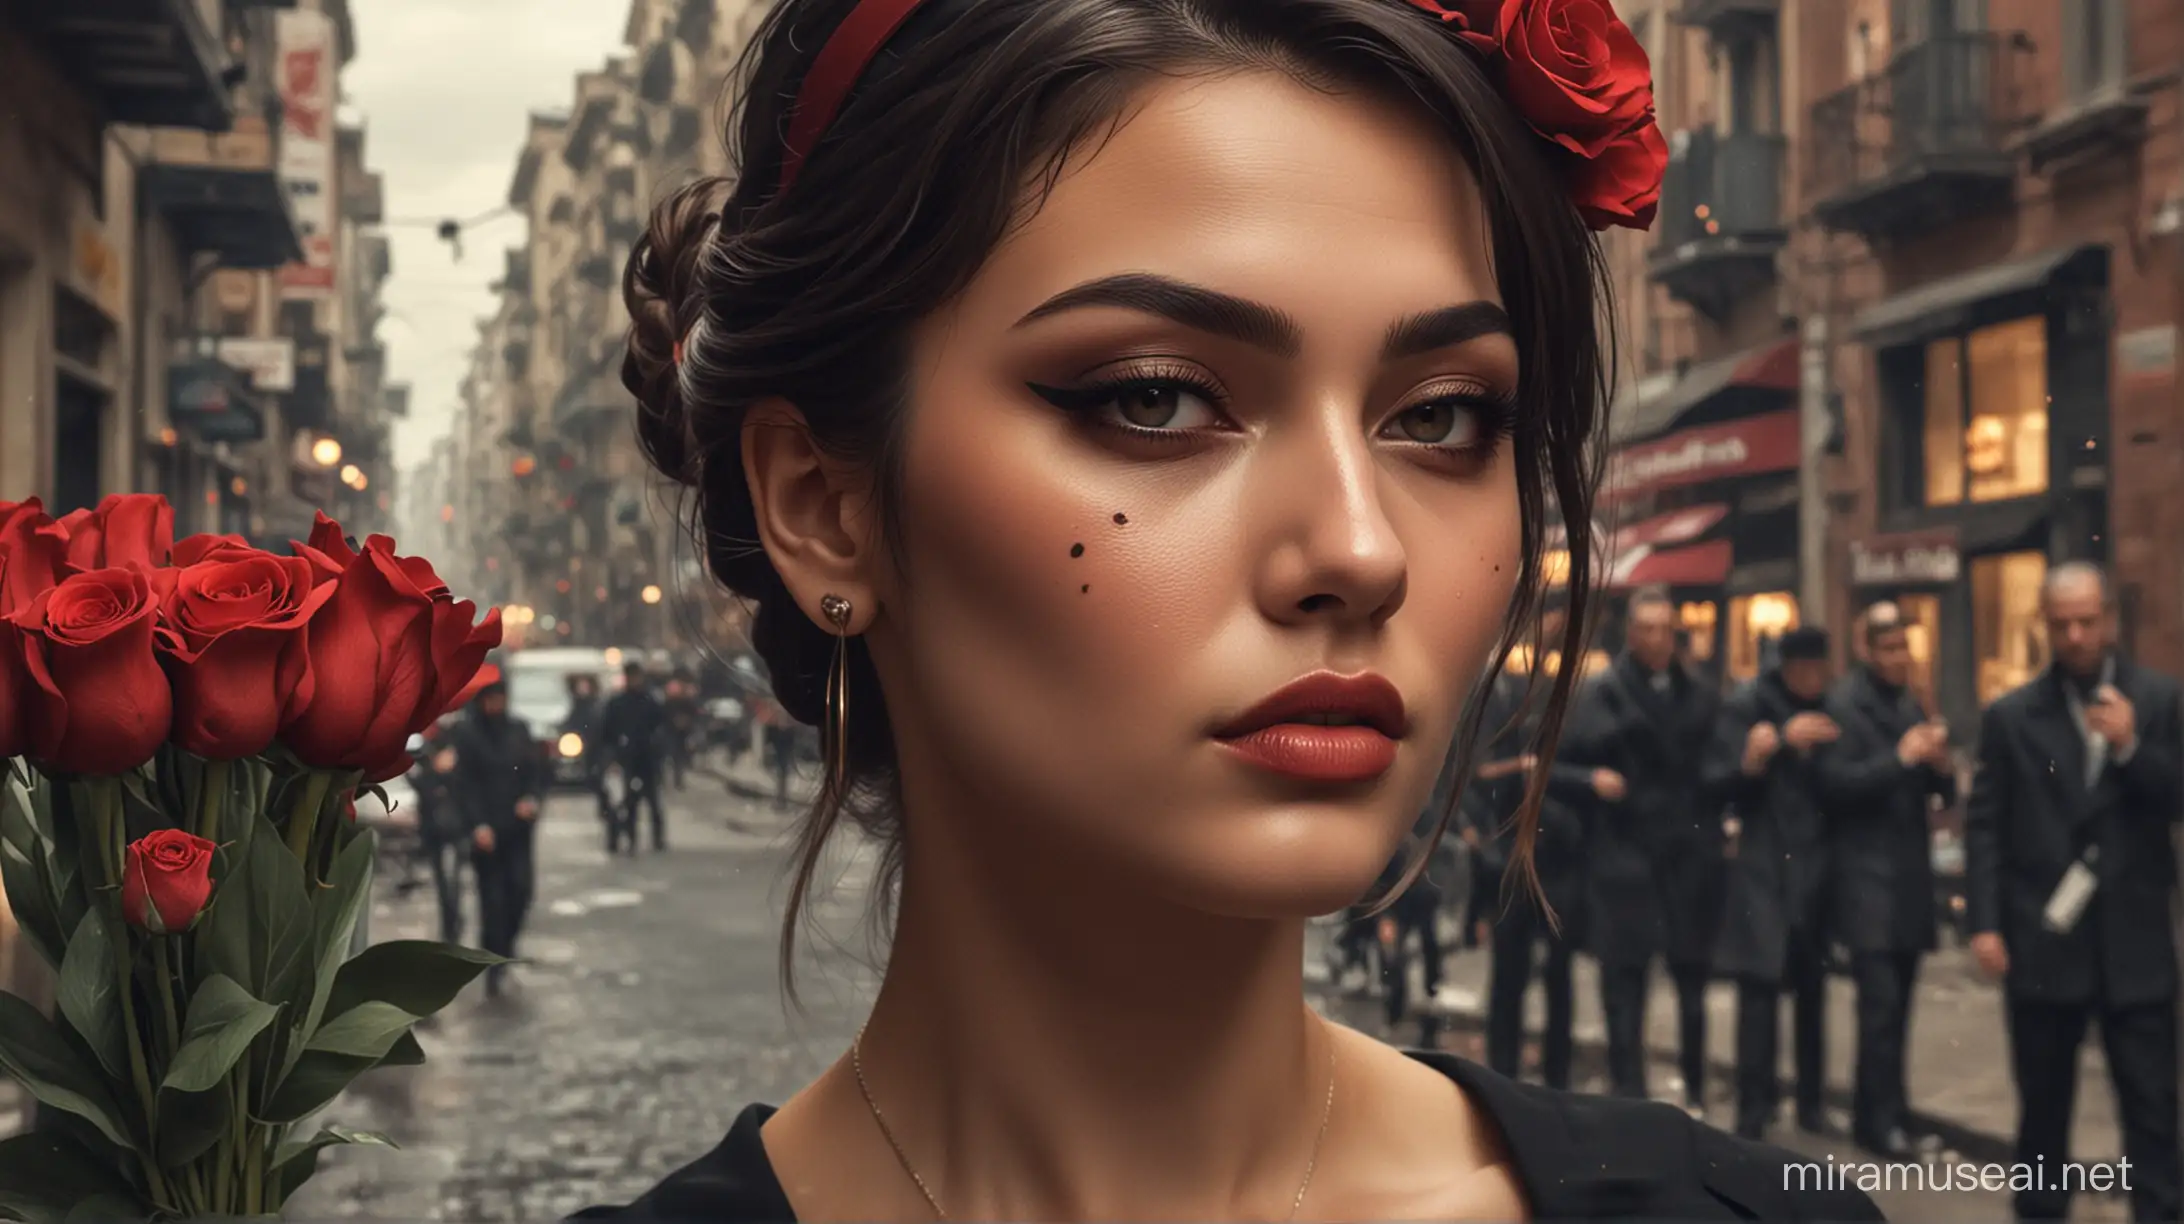 In a mafia city, a stylish girl should have Best Mafia Elite written on her forehead, and the rest of the men would offer her flowers, cigarettes, and hearts.